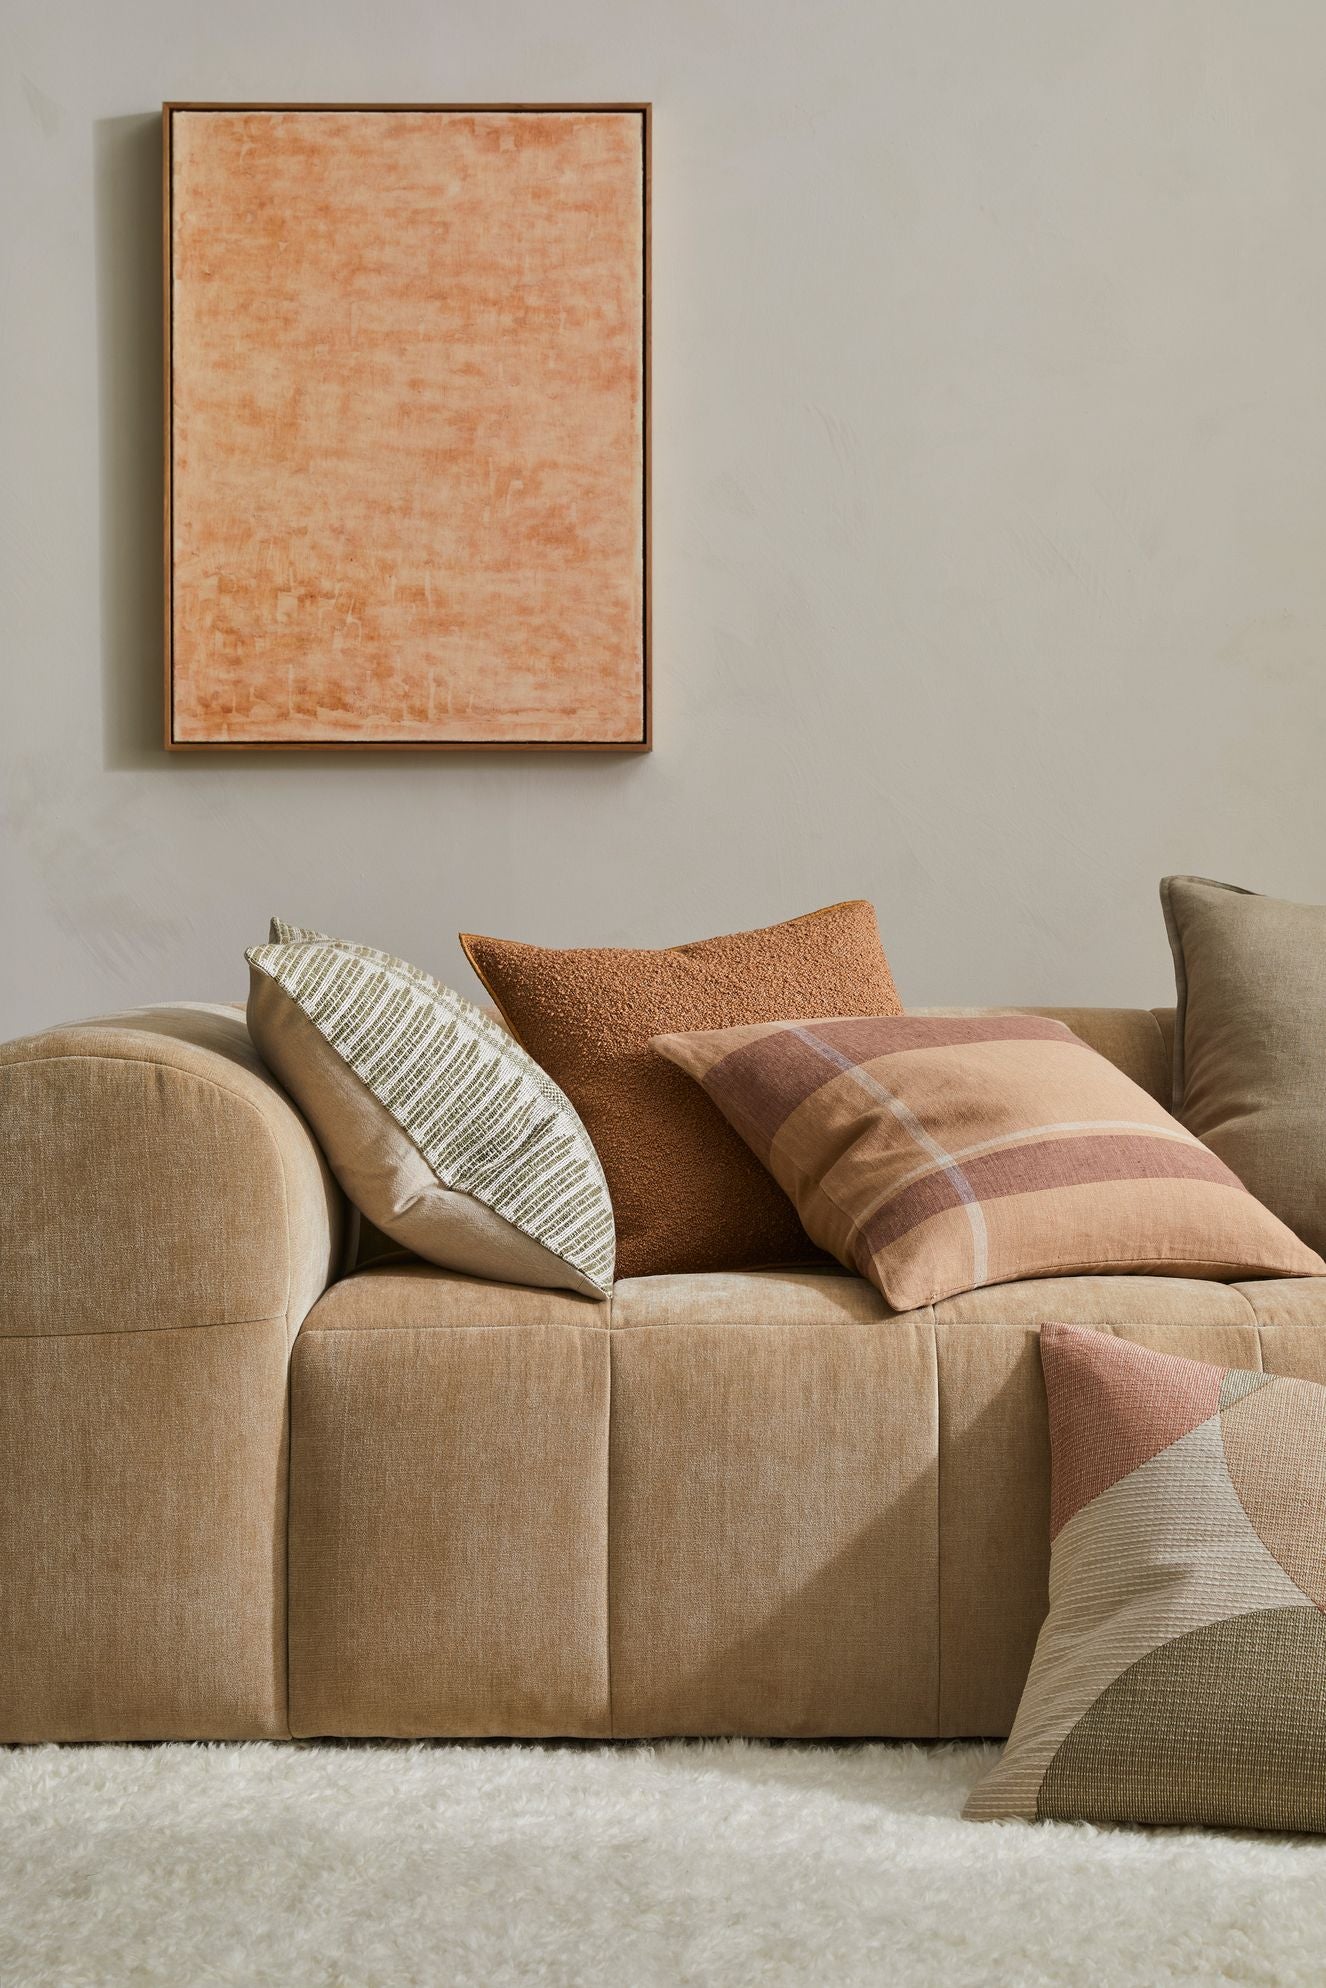 Dante cushions, linen cushion from weave on a sofa